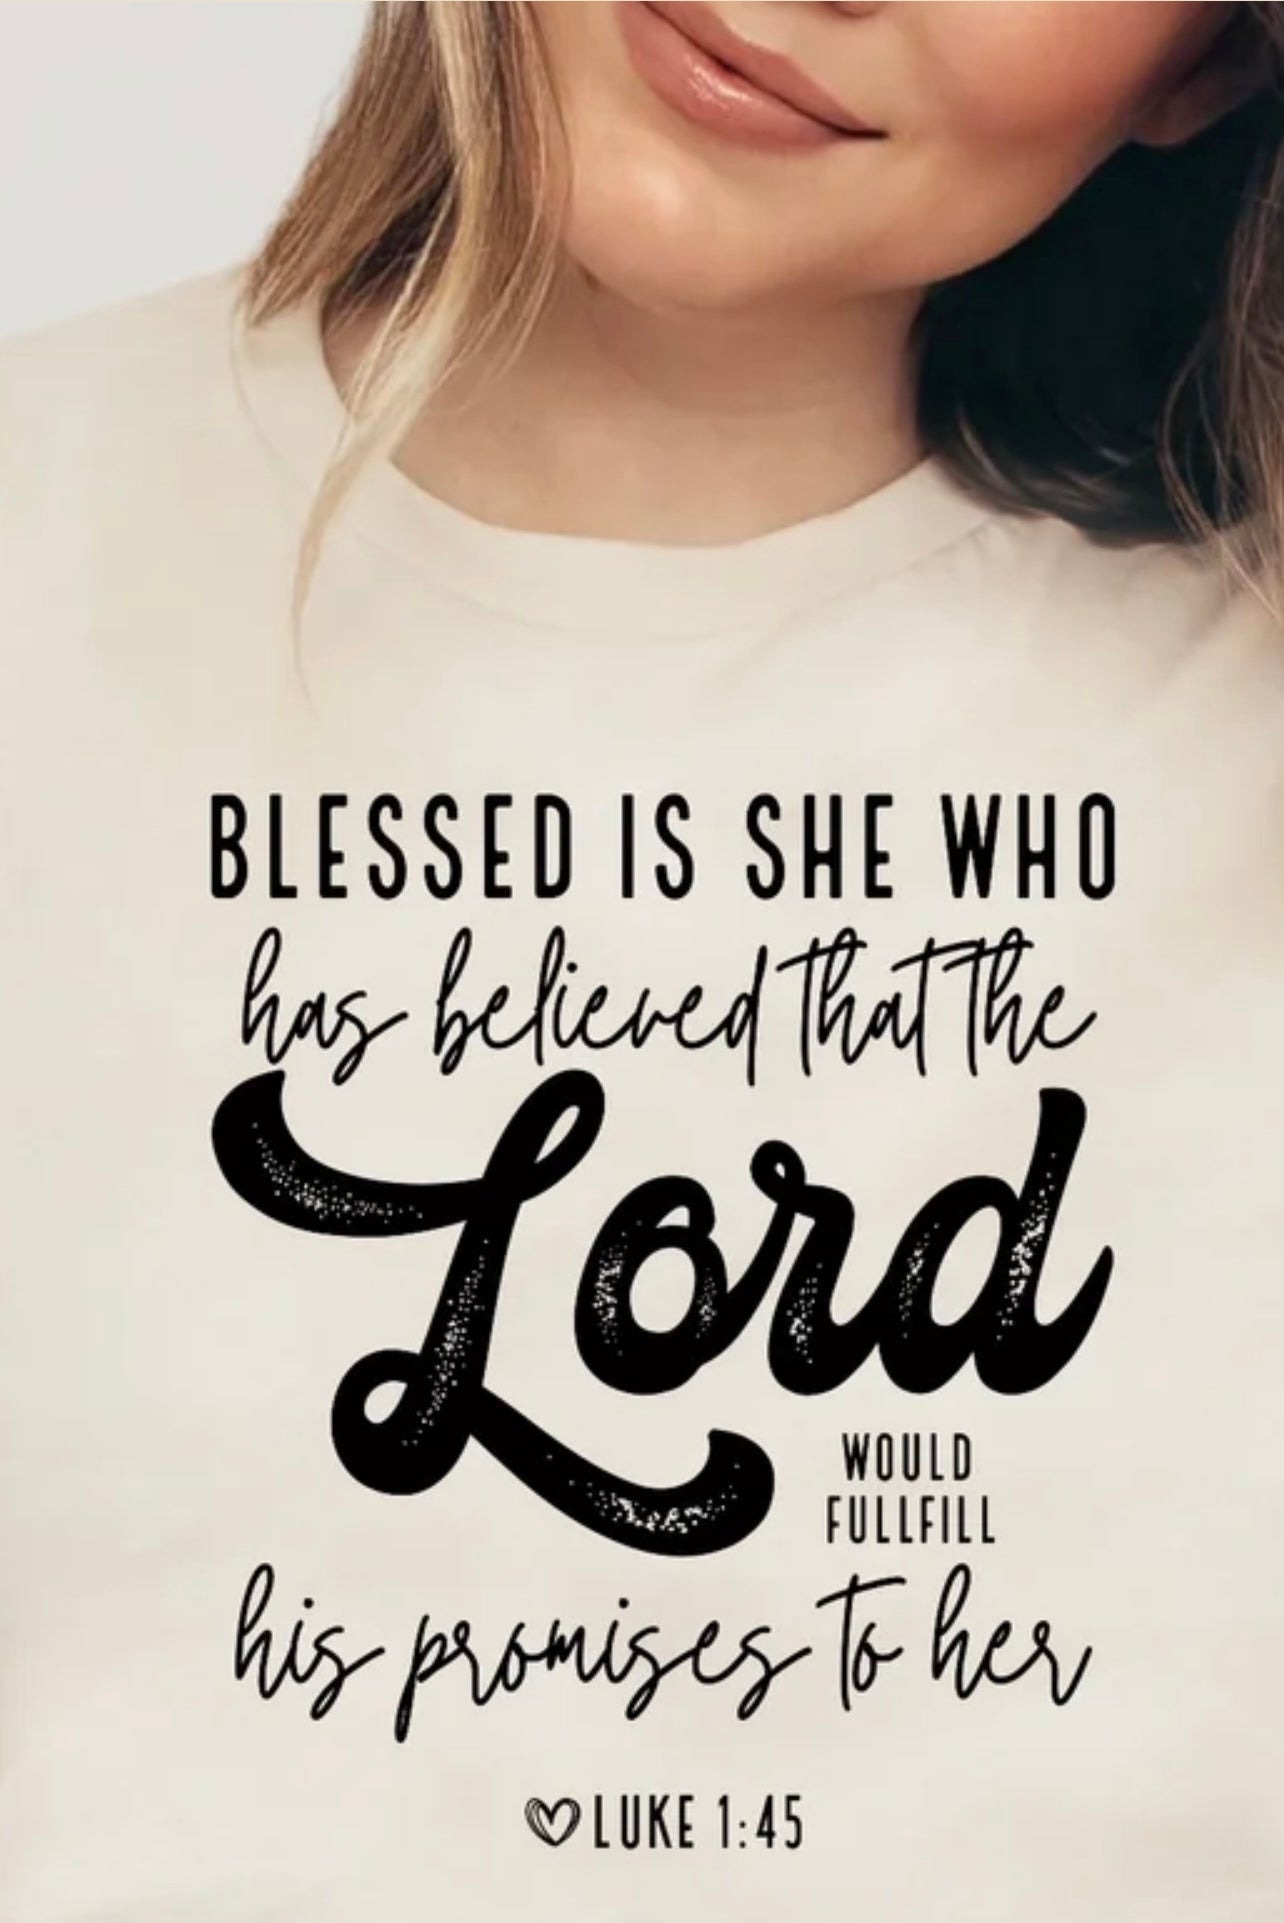 Blessed Is She Who has believed that the Lord Would Fulfill his promises to her Luke 1:45